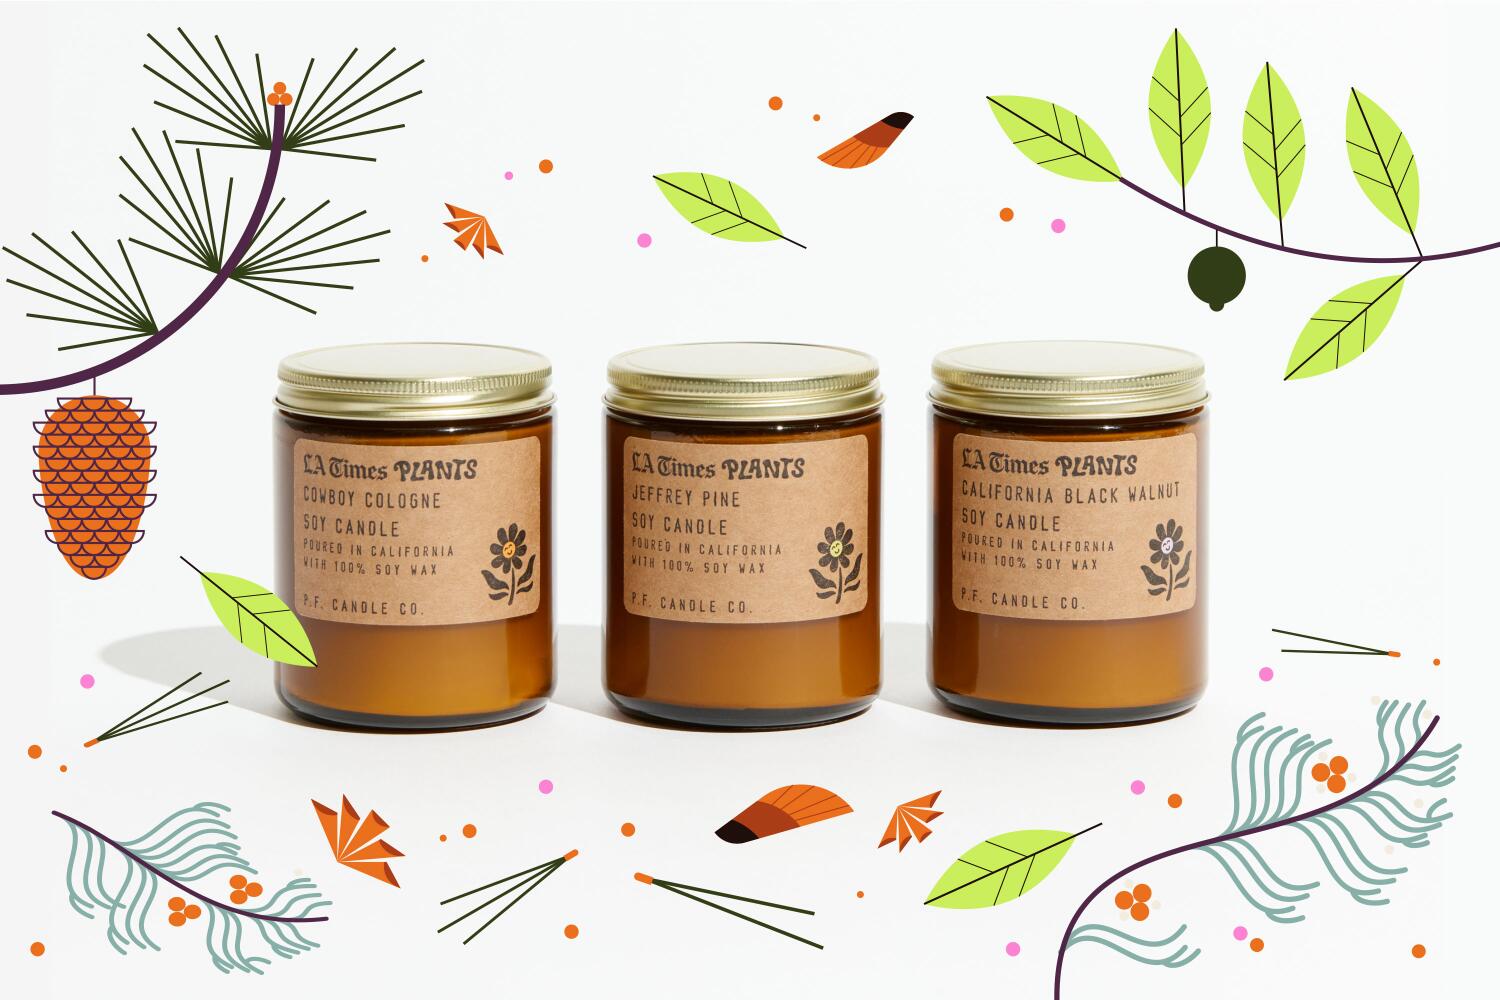 Love California native plants? Check out our collab with P.F. Candle Co.